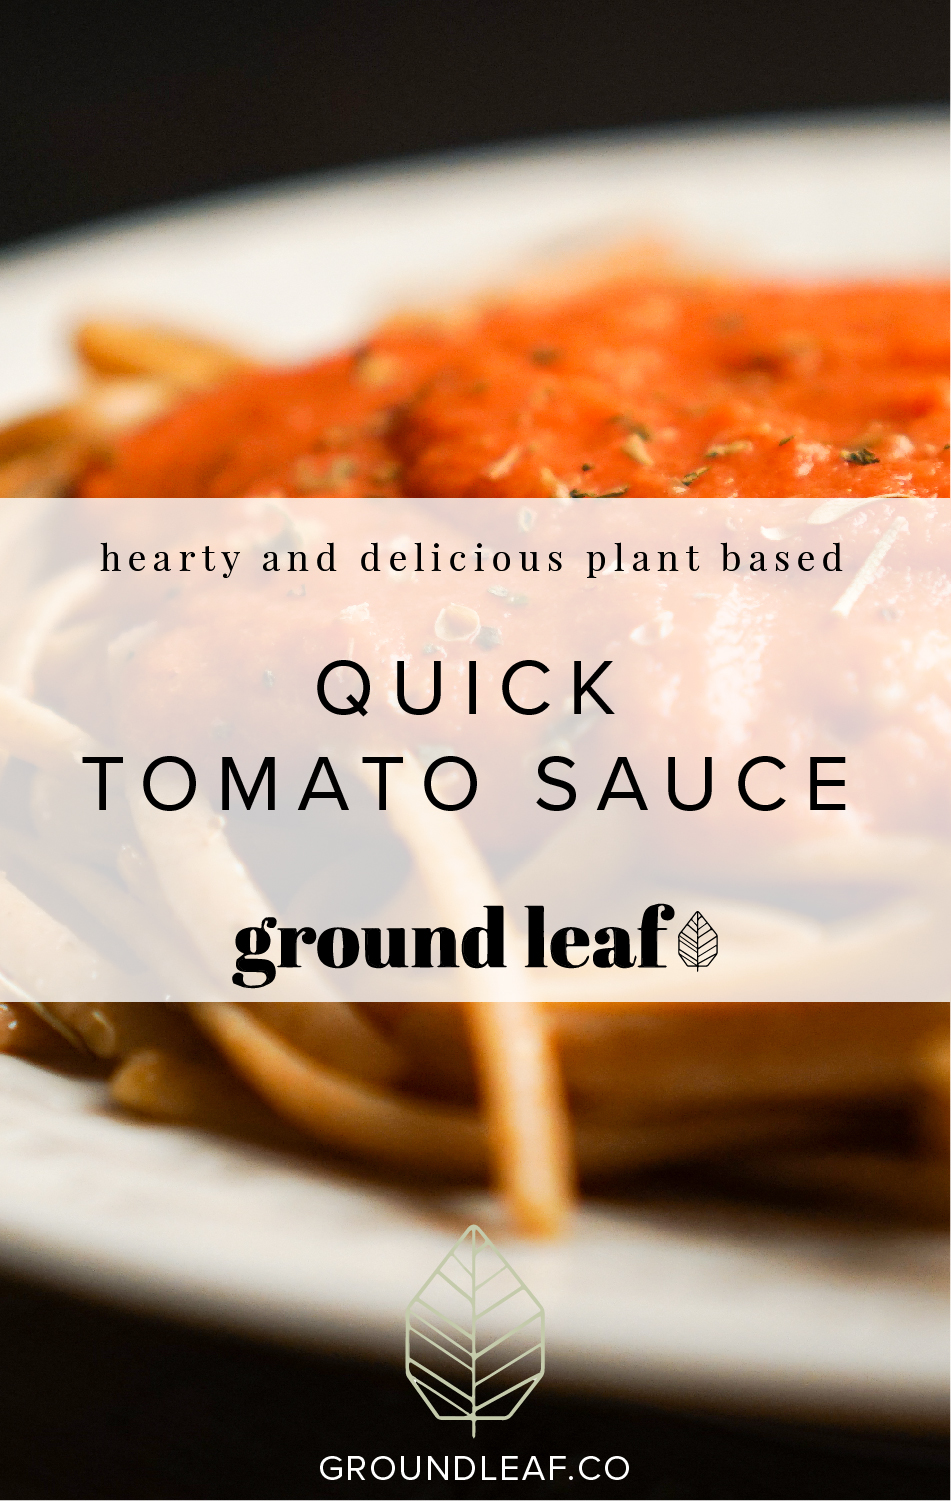 Quick, tasty tomato sauce from a can. But elevated and enhanced. A quick solution if you don't have hours to simmer a fresh sauce on the stove. 